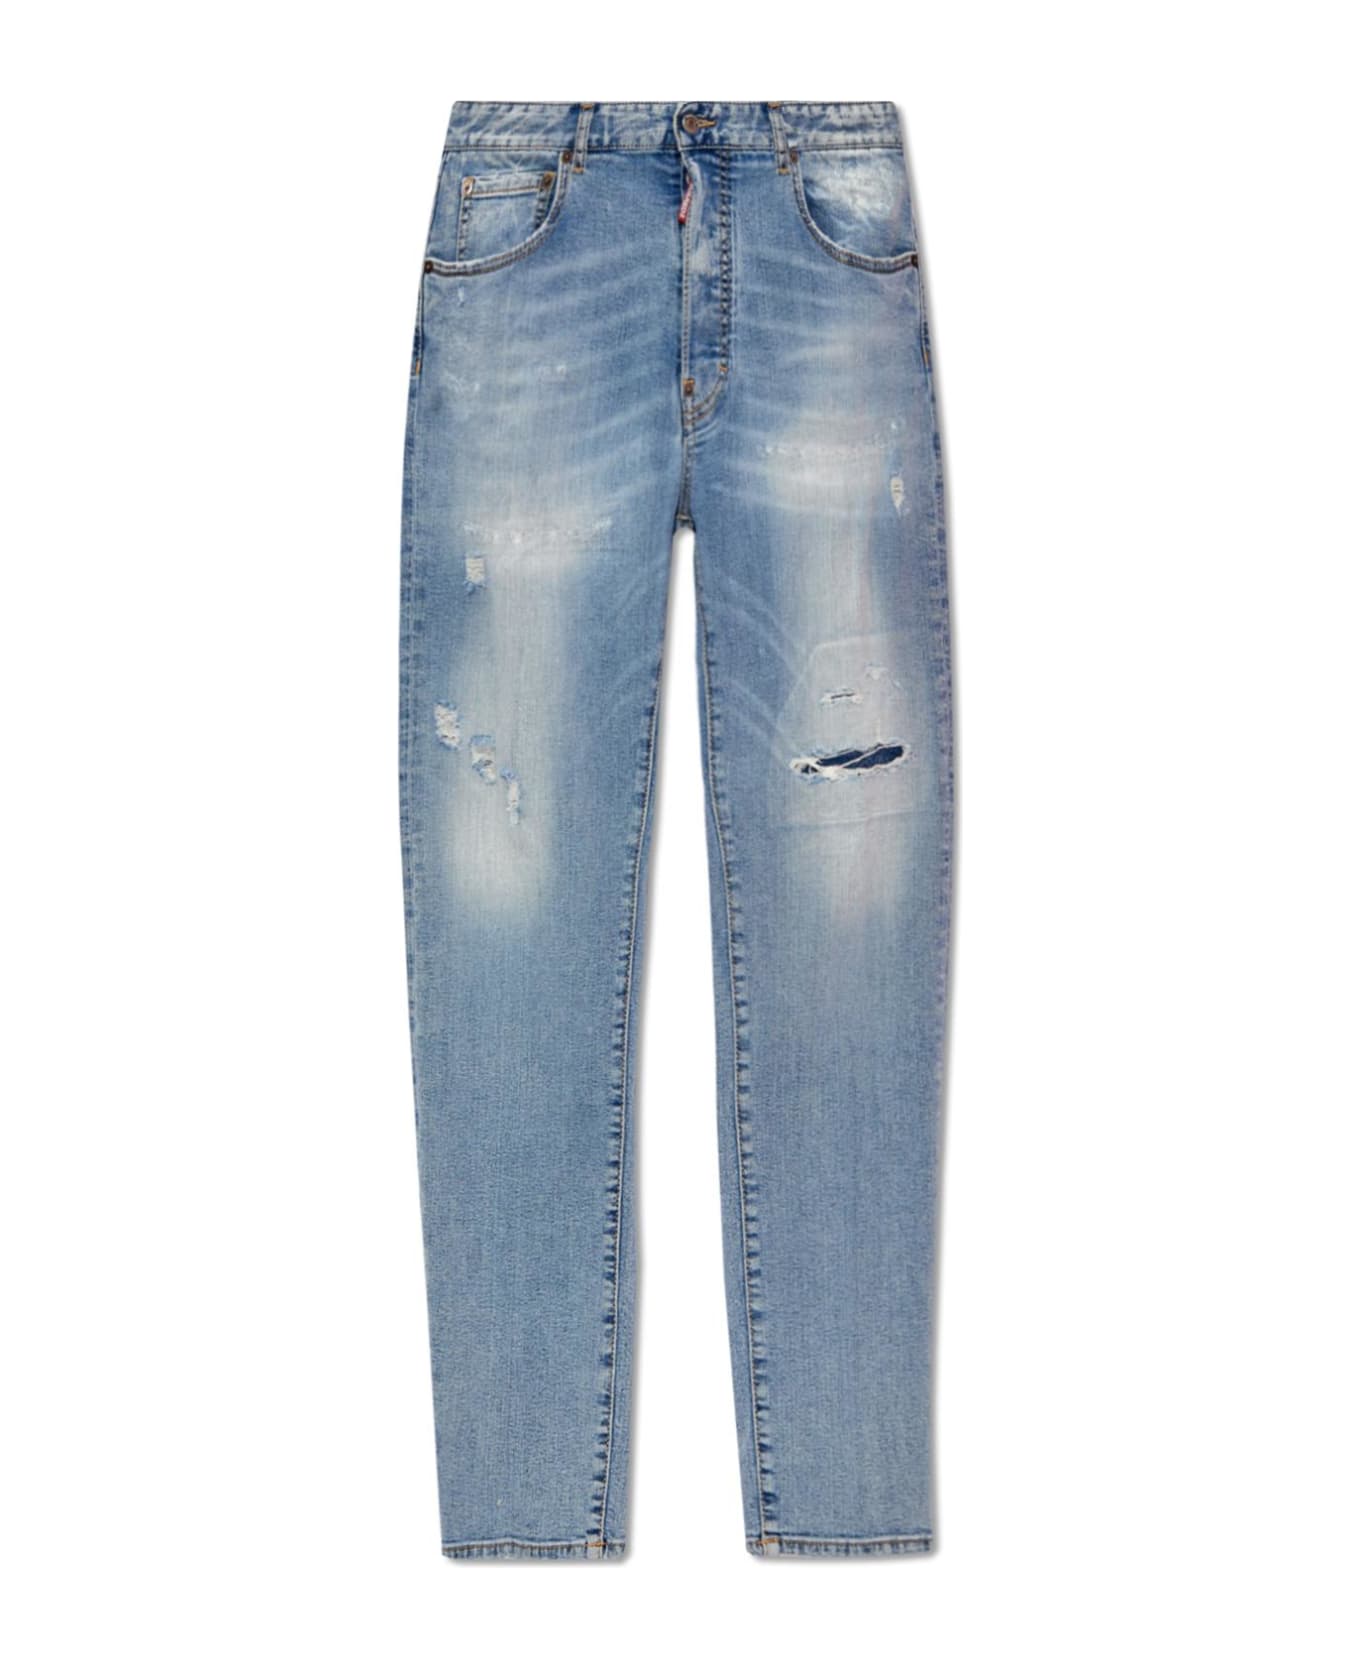 Dsquared2 '642' Jeans - Navy Blue